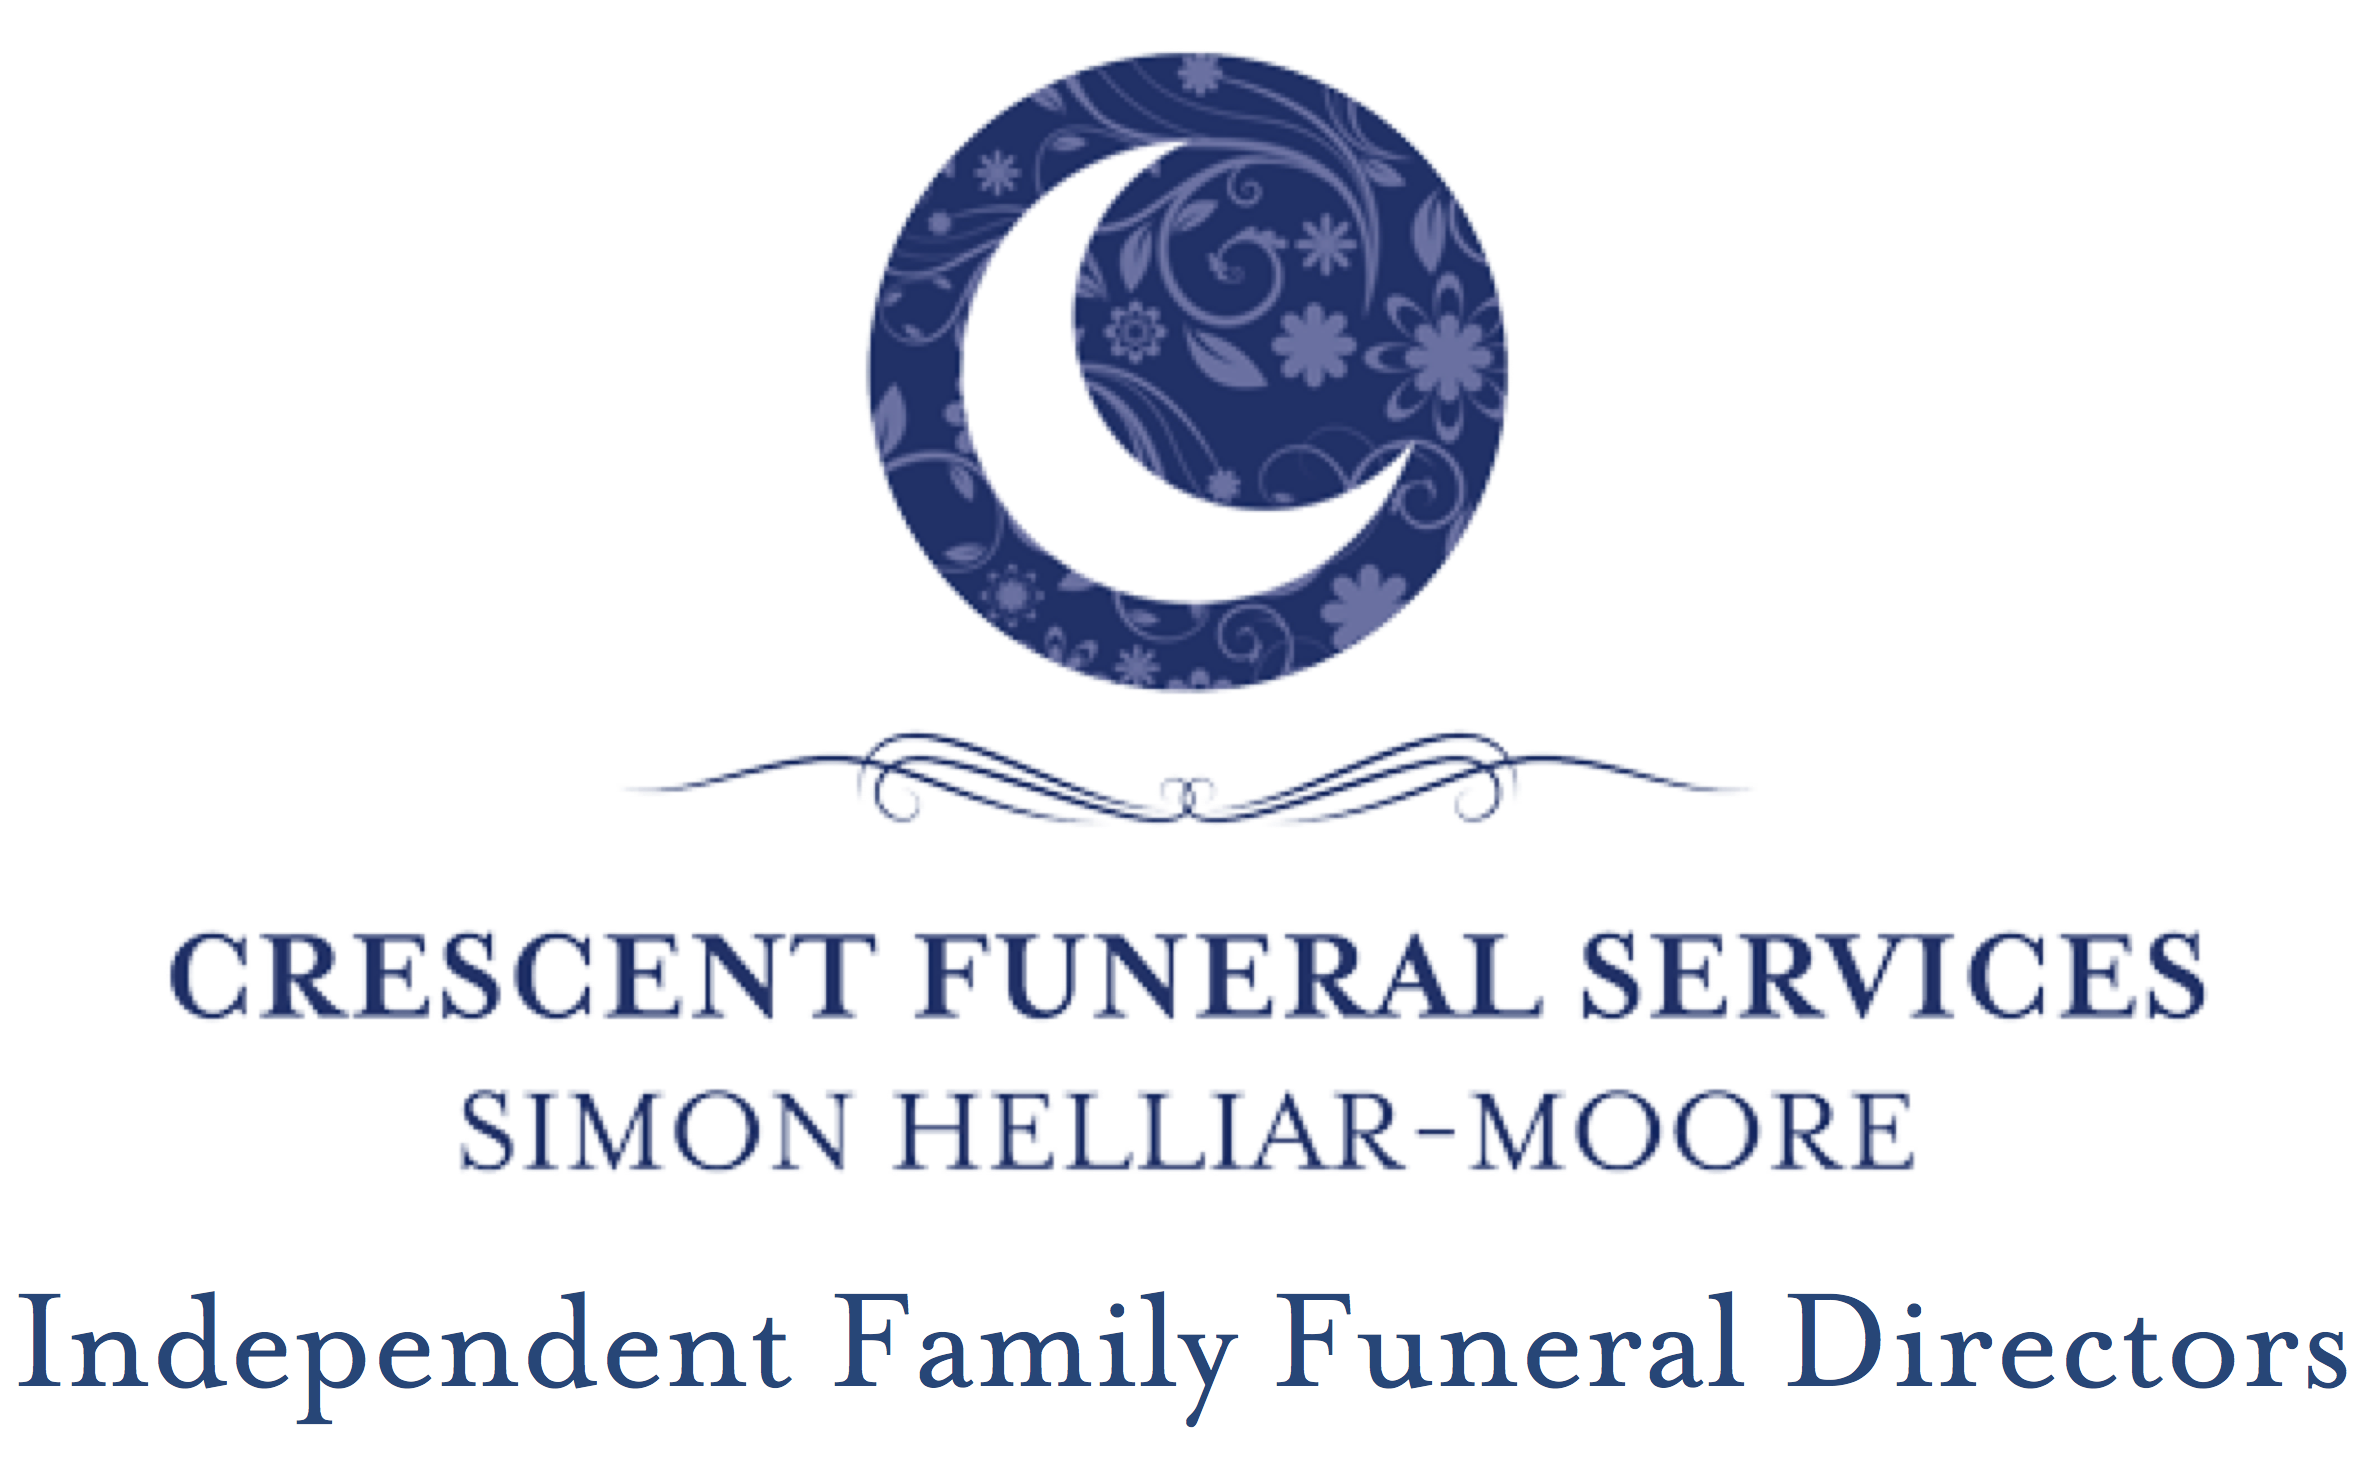 Crescent Funeral Services